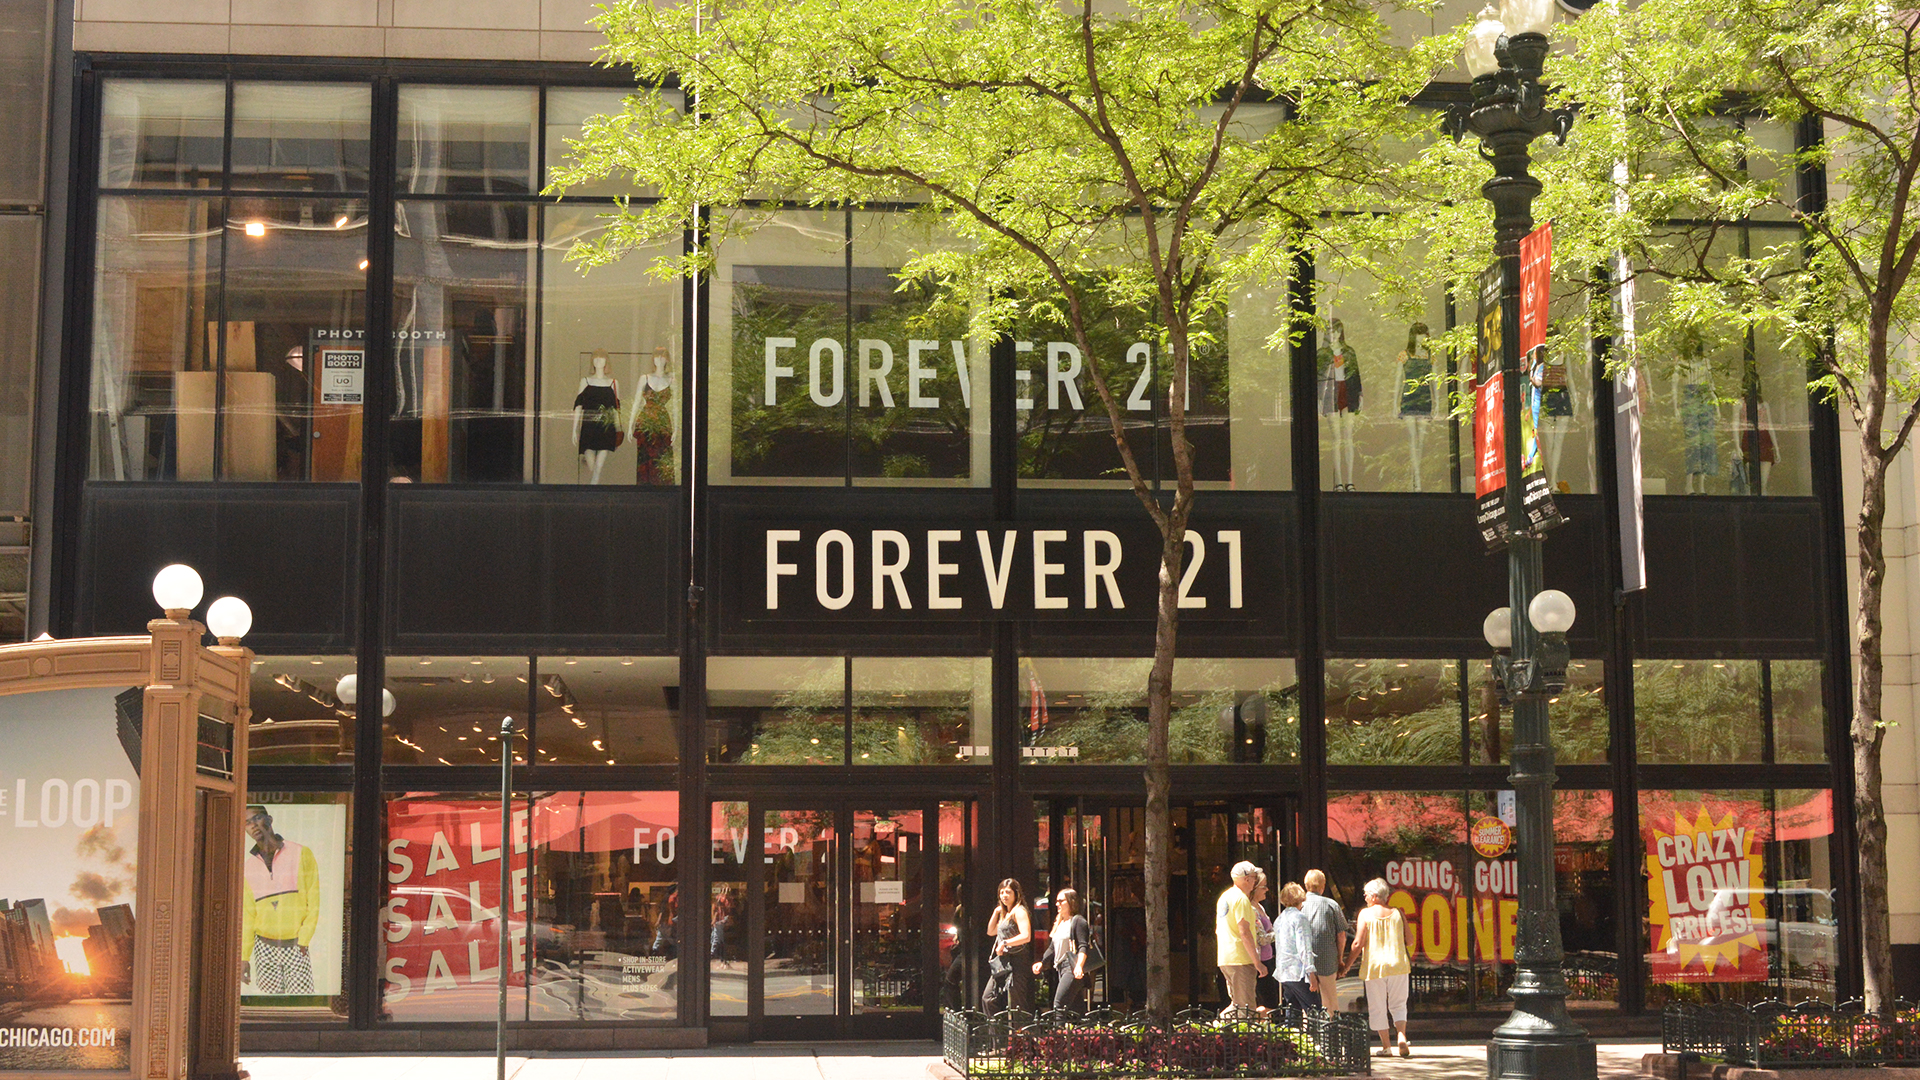 Ad  Hey y'all come visit the new @FOREVER 21 inside Chicago